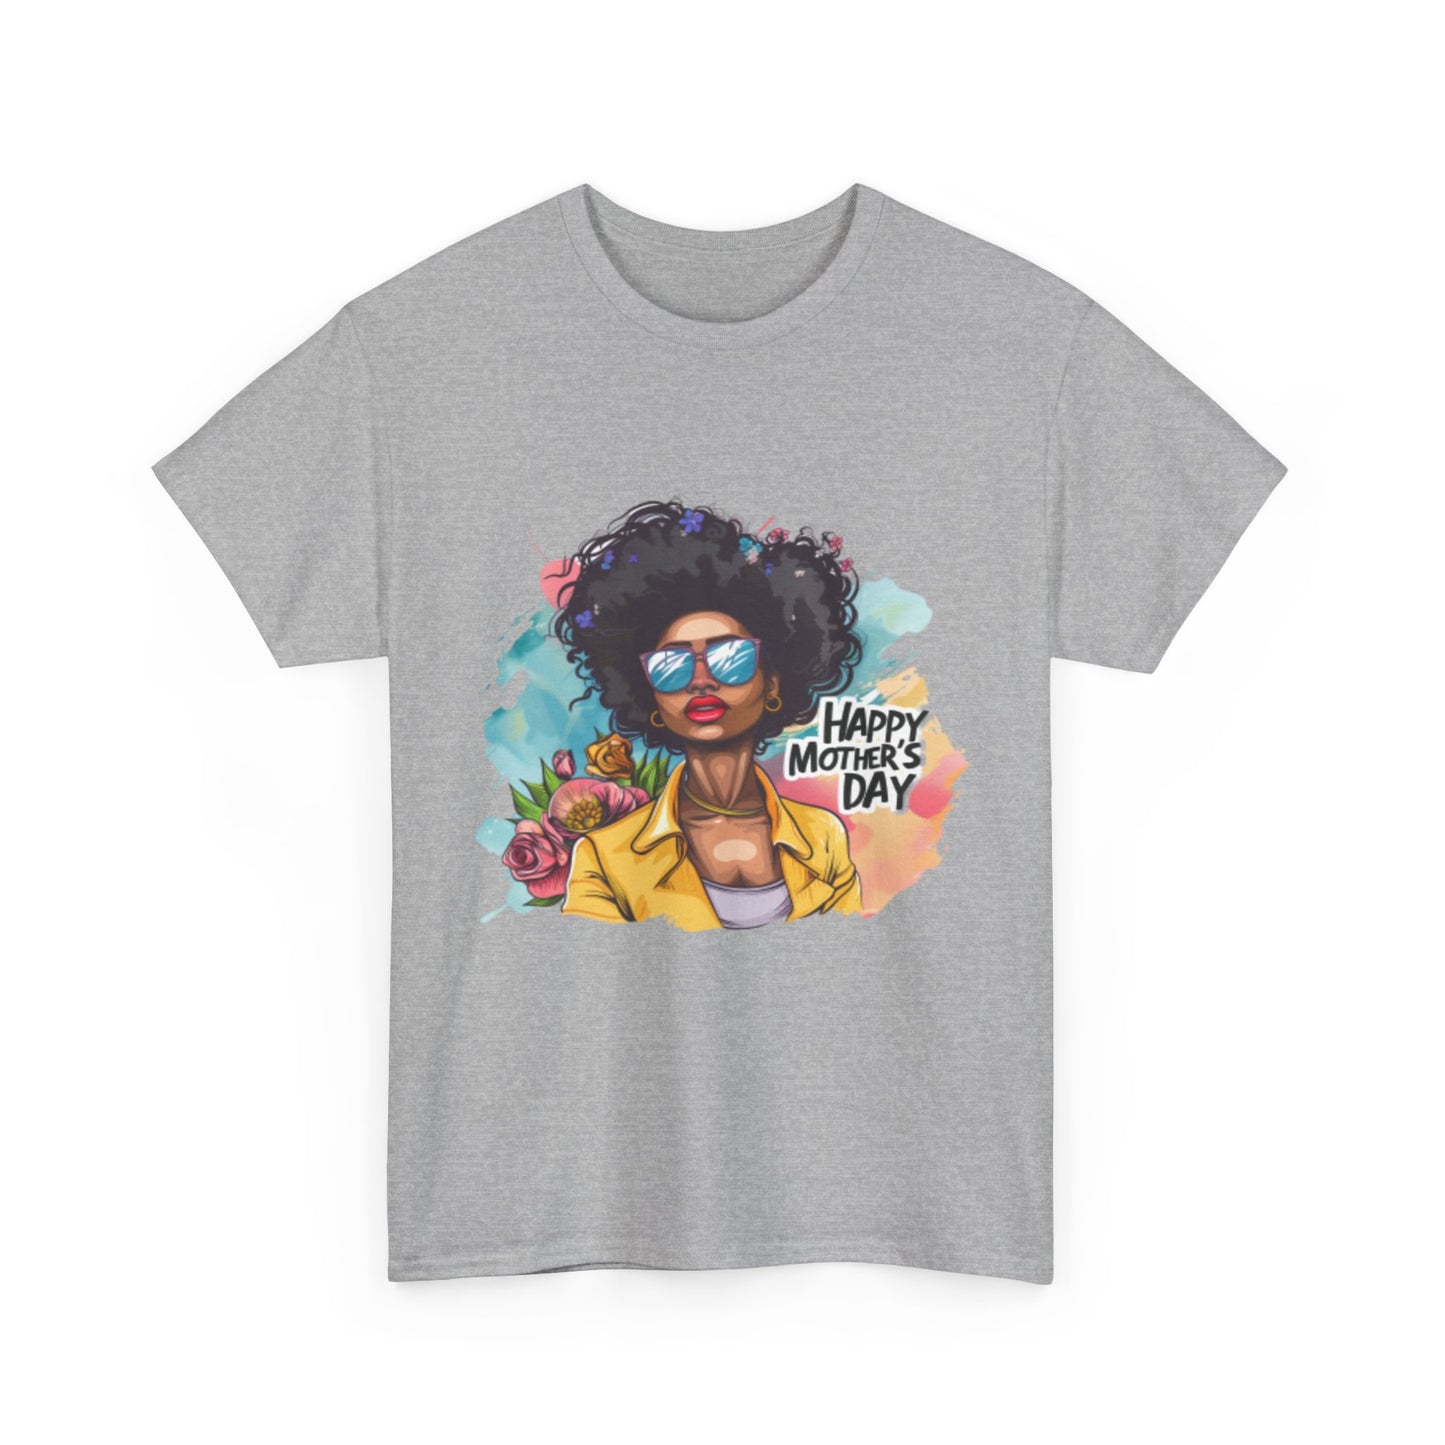 Happy Mother's Day African American Mom Graphic Unisex Heavy Cotton Tee Cotton Funny Humorous Graphic Soft Premium Unisex Men Women Sport Grey T-shirt Birthday Gift-39